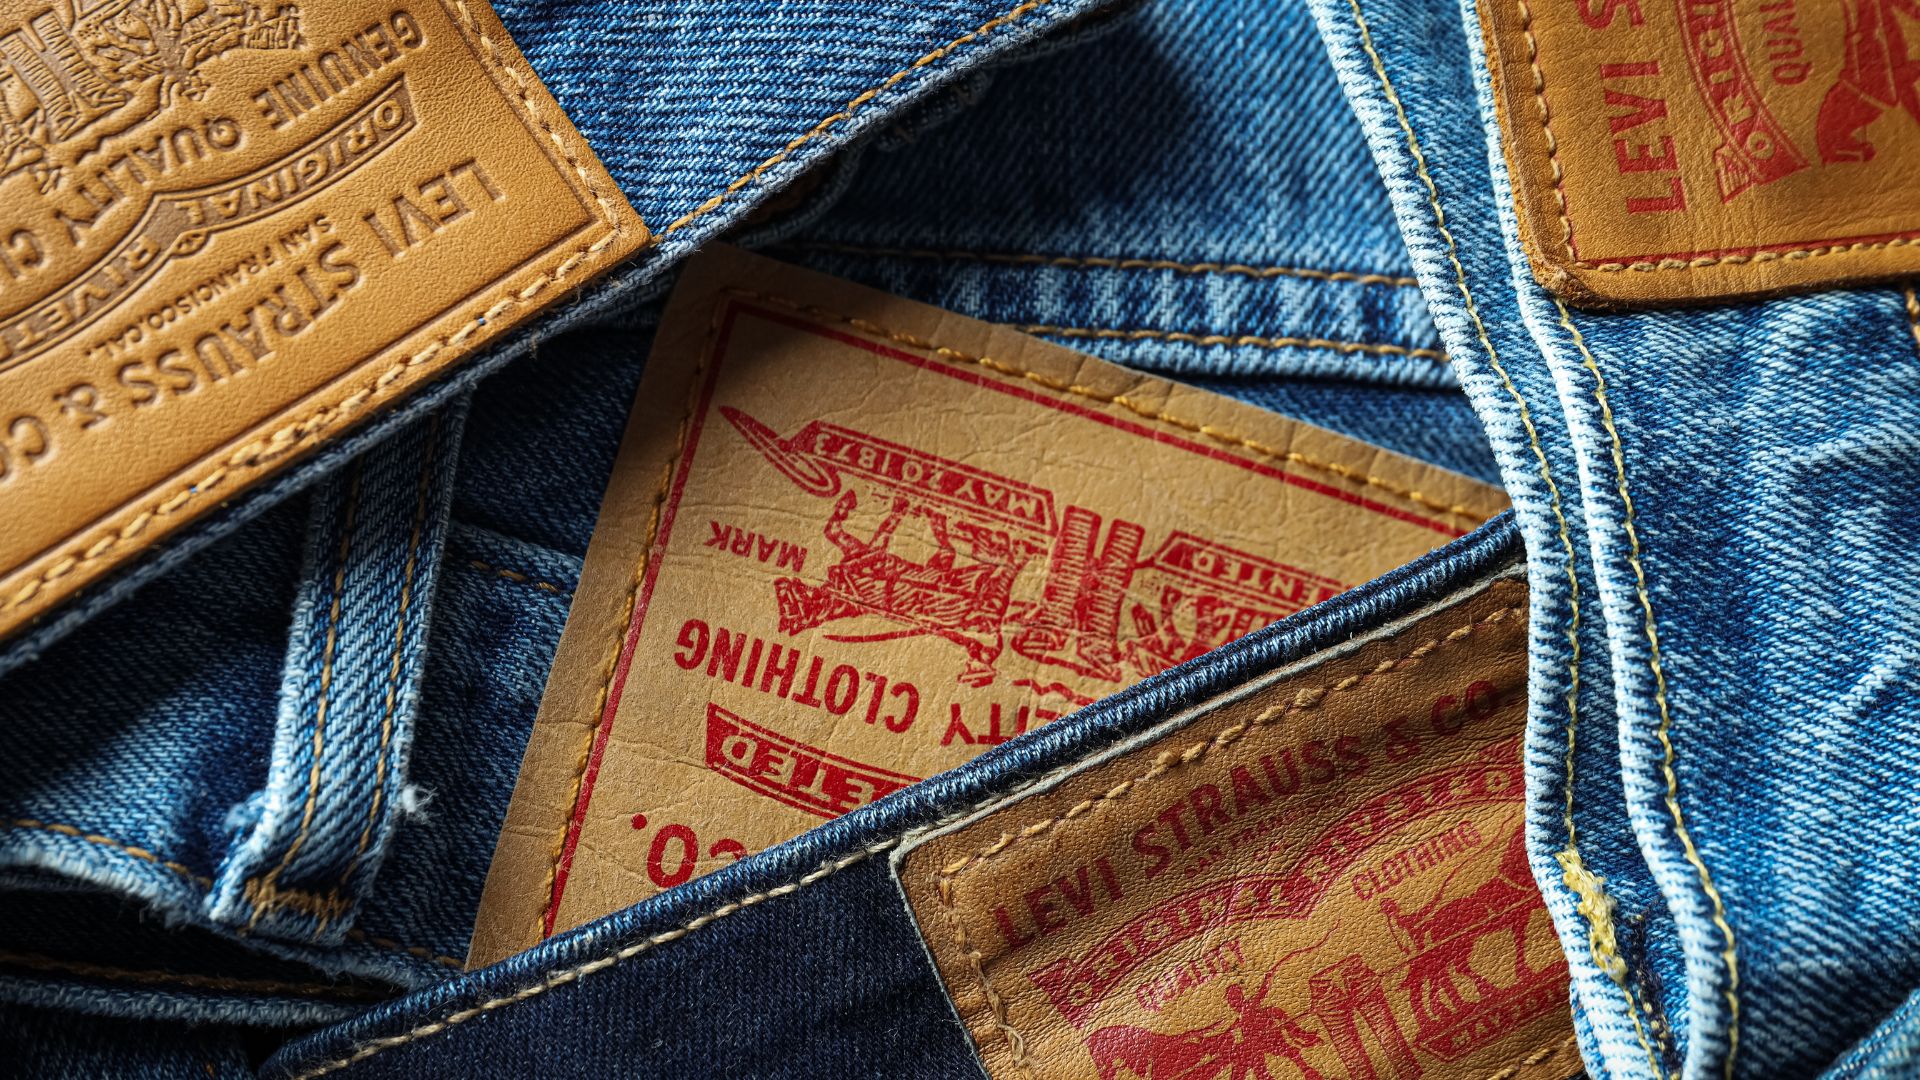 Levi’s as the Global Fashion Label for Jeans